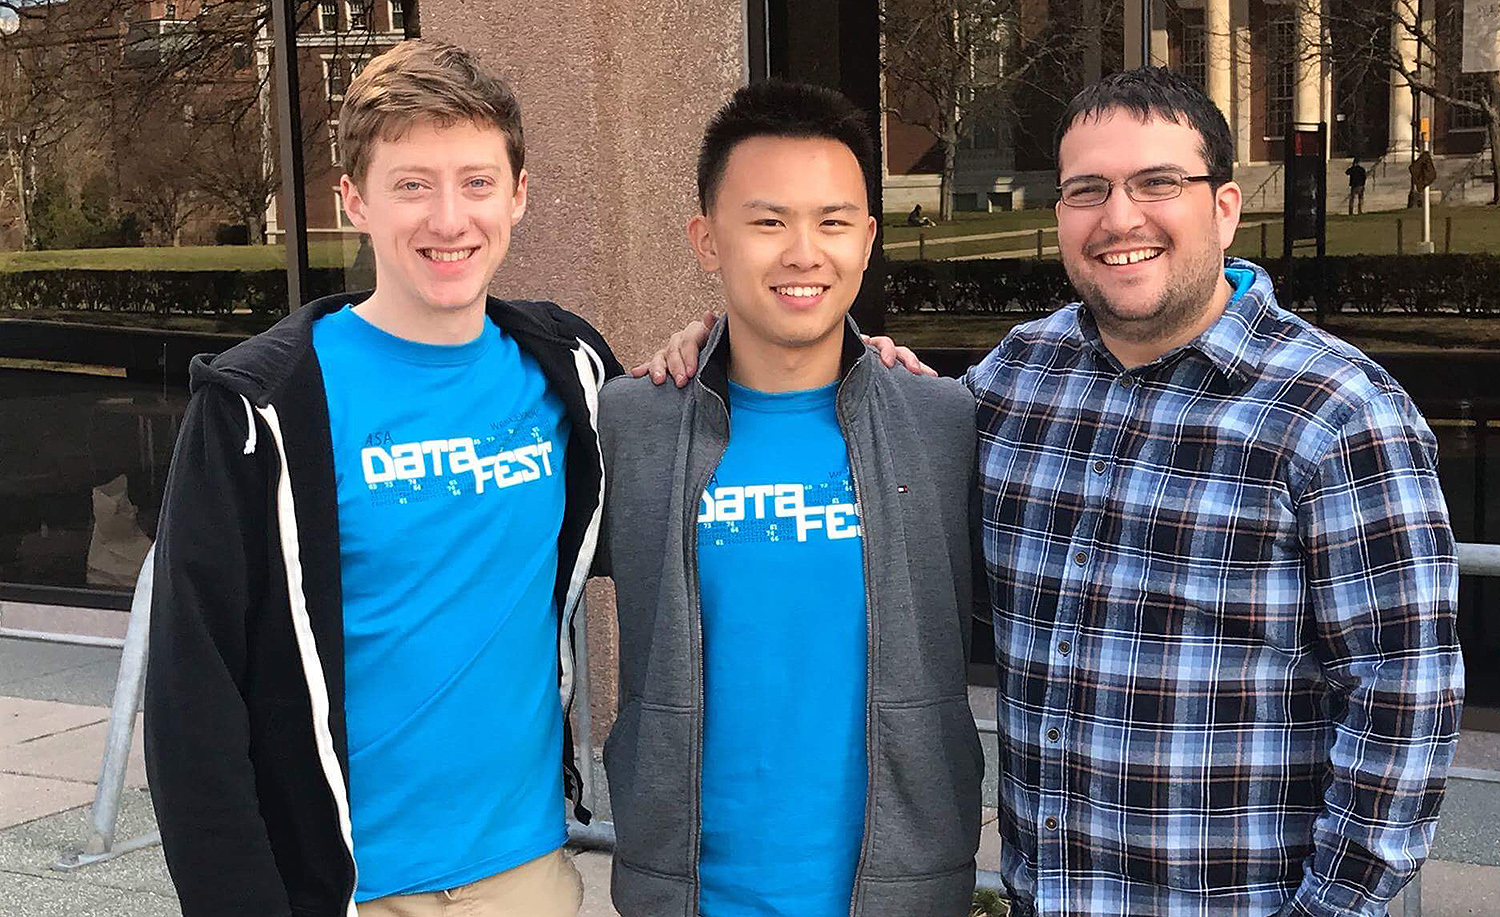 Unsupervised Leopards, a team from Lafayette and Wesleyan, received an award for "Best Data Preparation." Students included Joshua Arfin and Benjamin Draves from Lafayette and Tiger Huang '17 from Wesleyan.